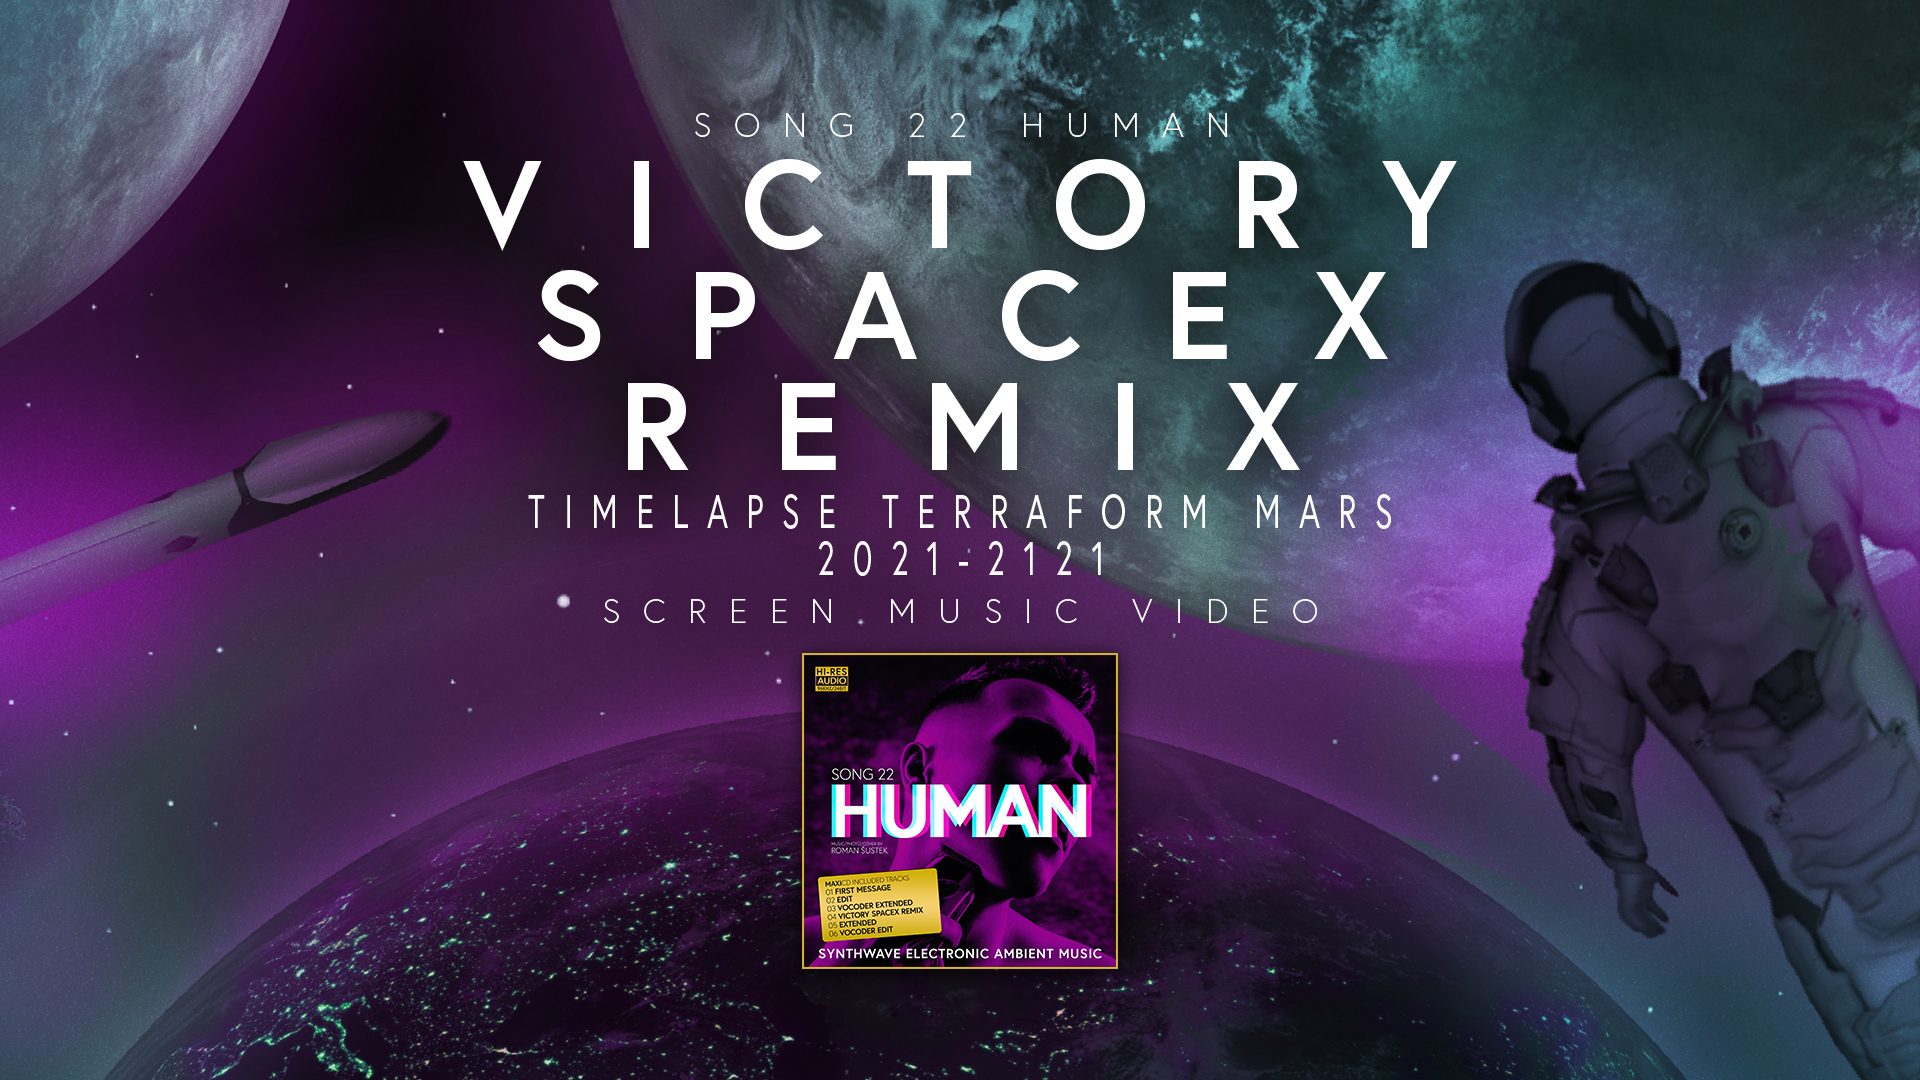 art_history_2021_roman_sustek_ambient_screen_remix_timelapse_music_video_victory_spacex_song_22_human